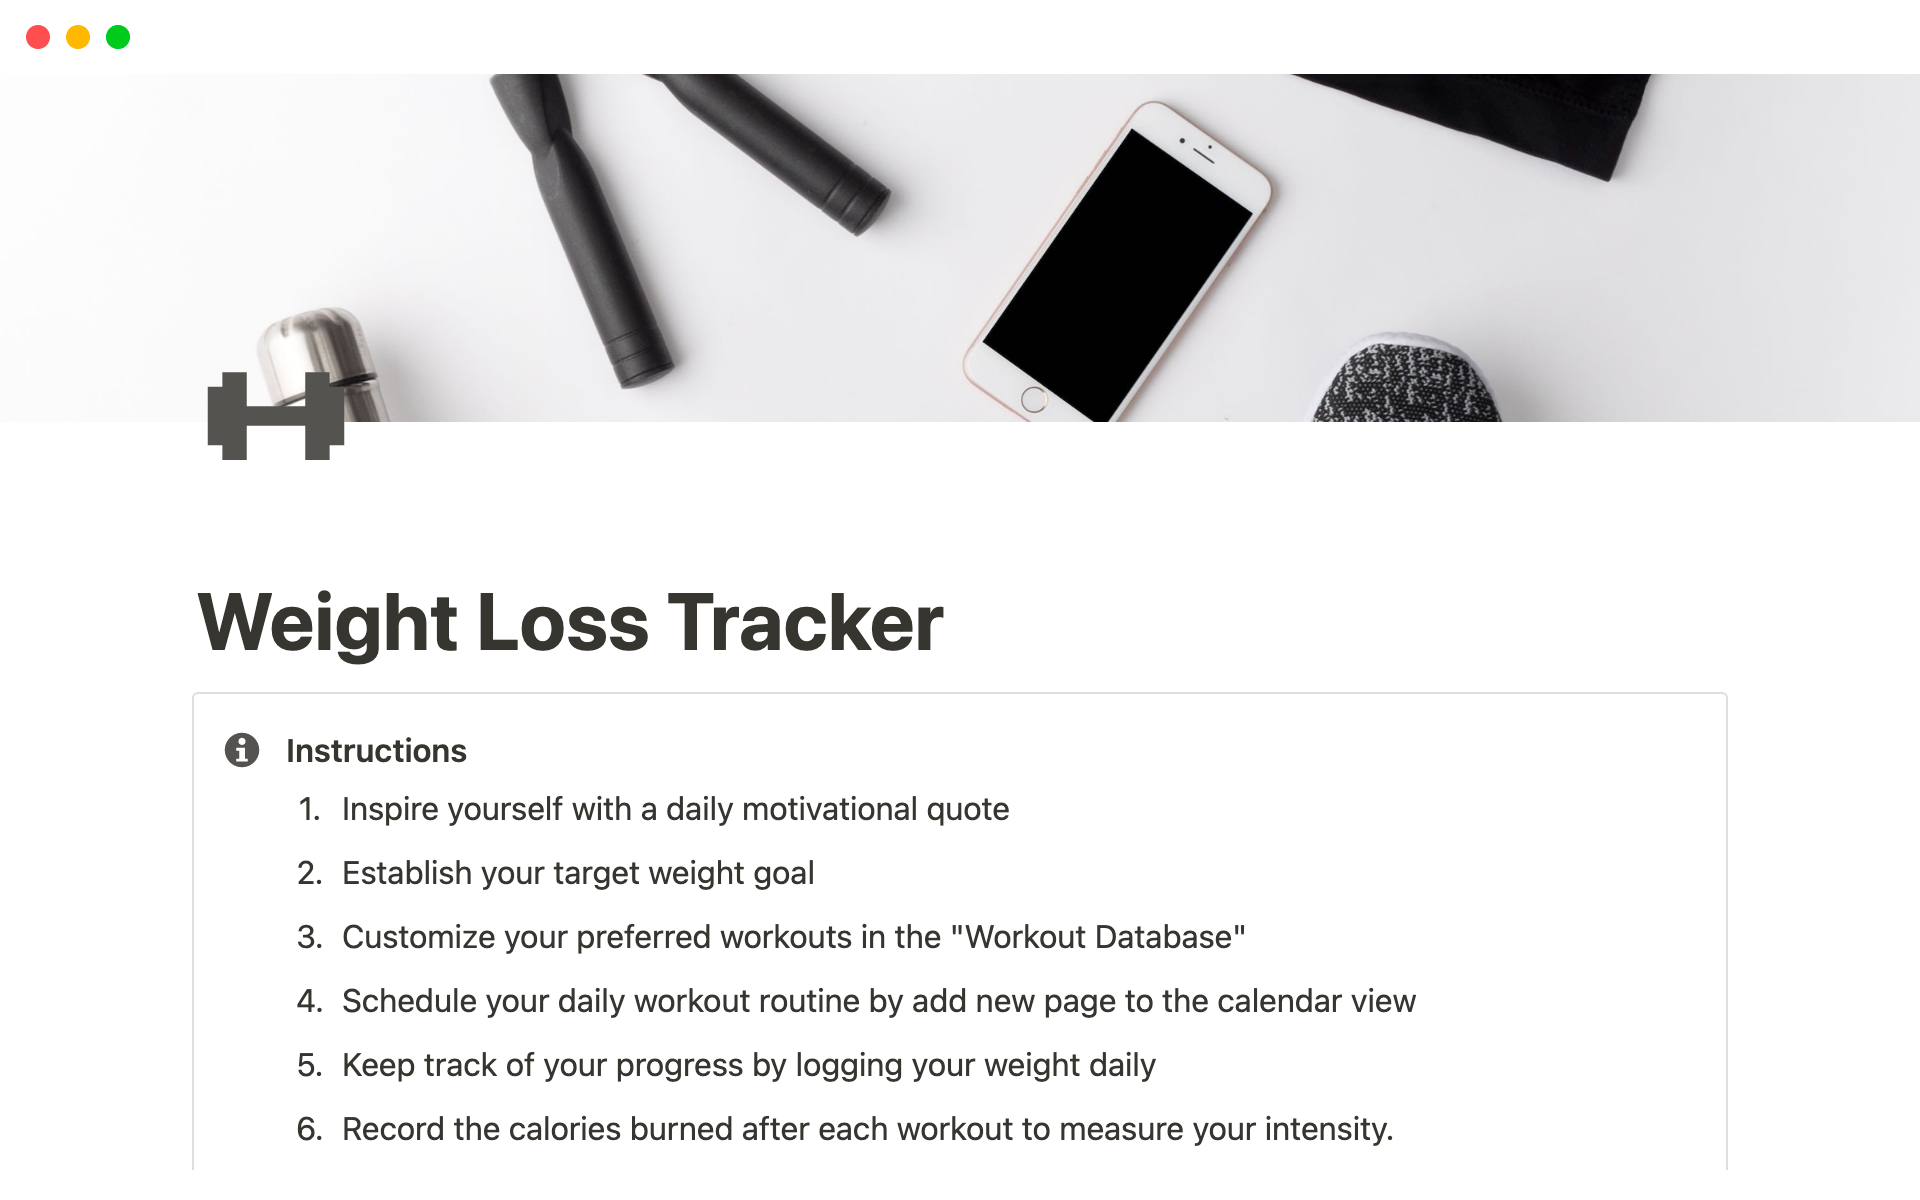 A template preview for Weight Loss Tracker